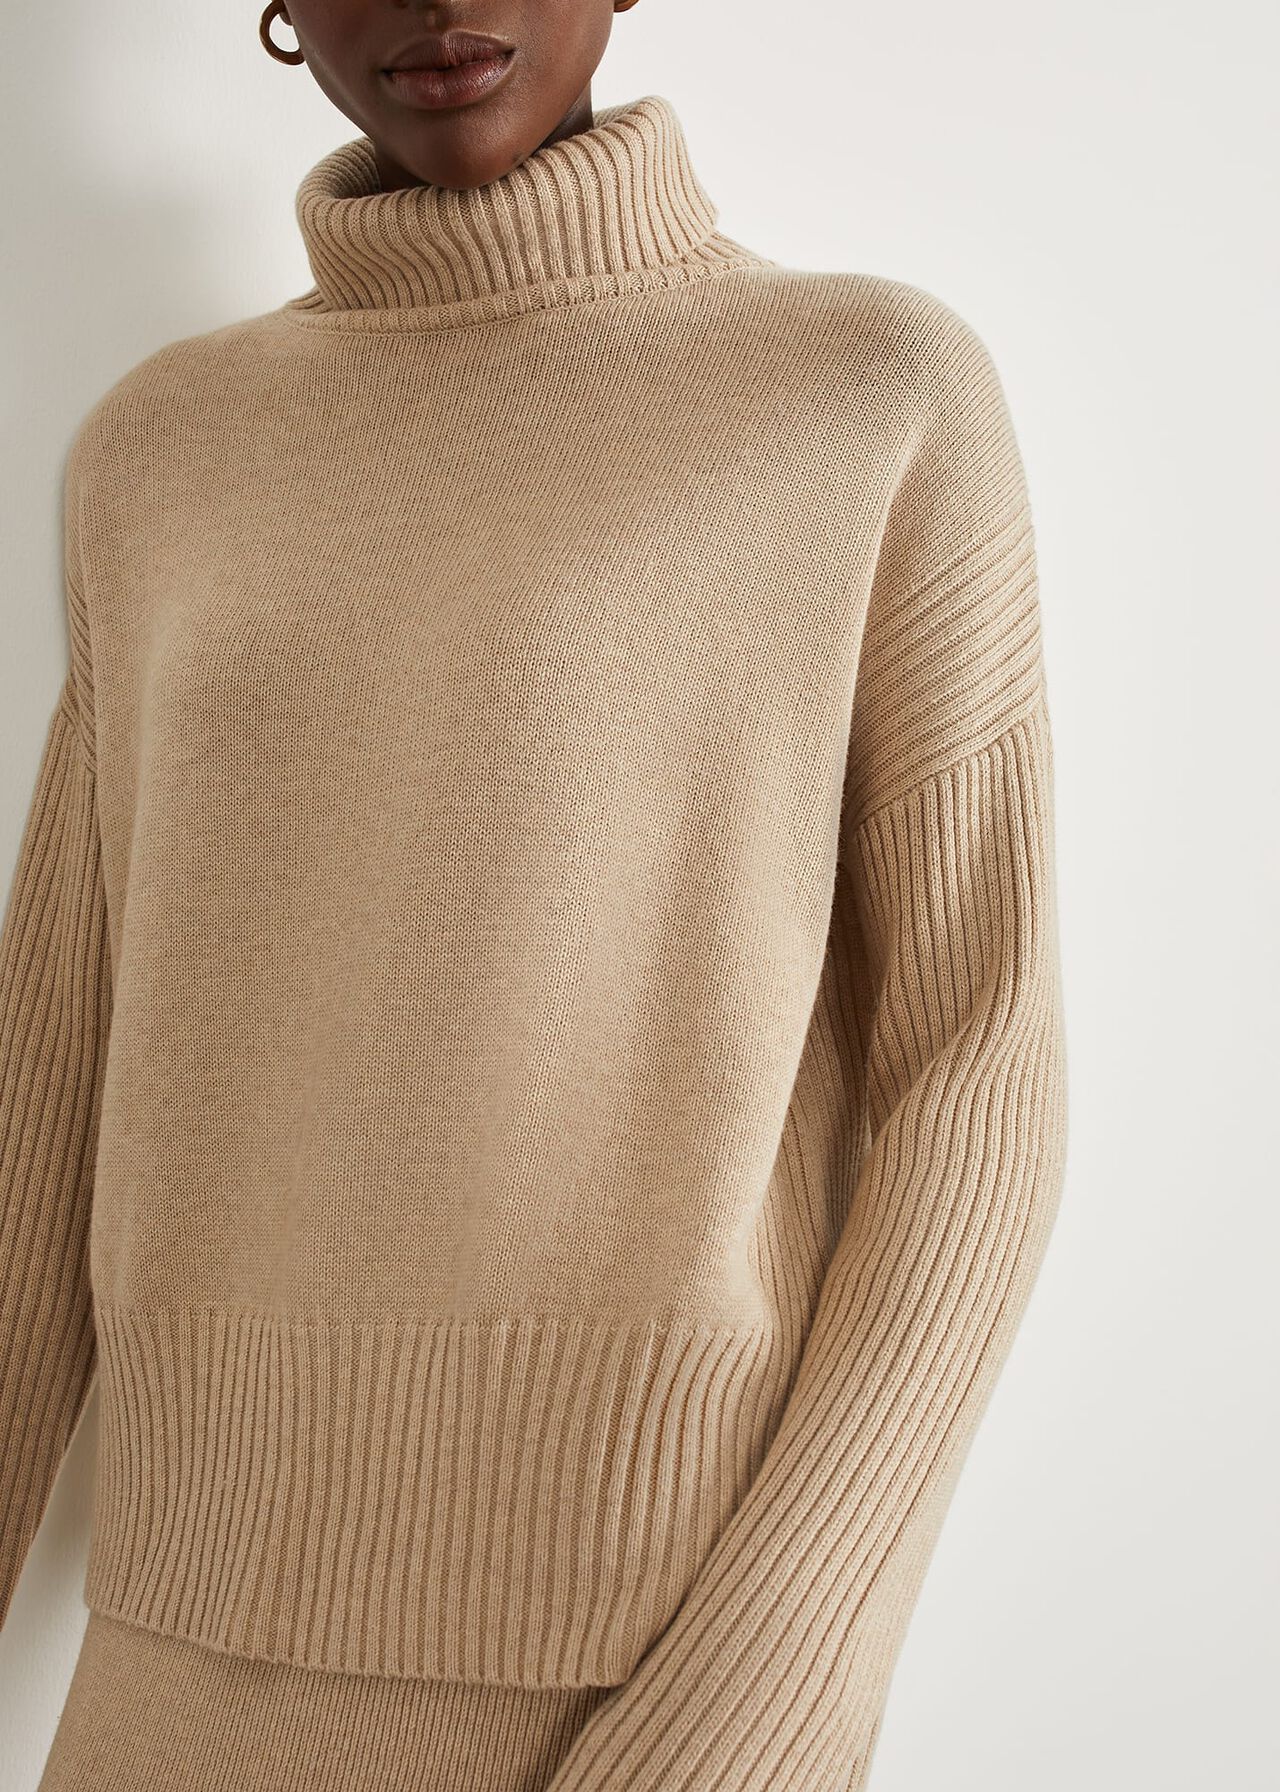 Lovell Co-Ord Wool Cotton Roll Neck Sweater, Oatmeal Marl, hi-res